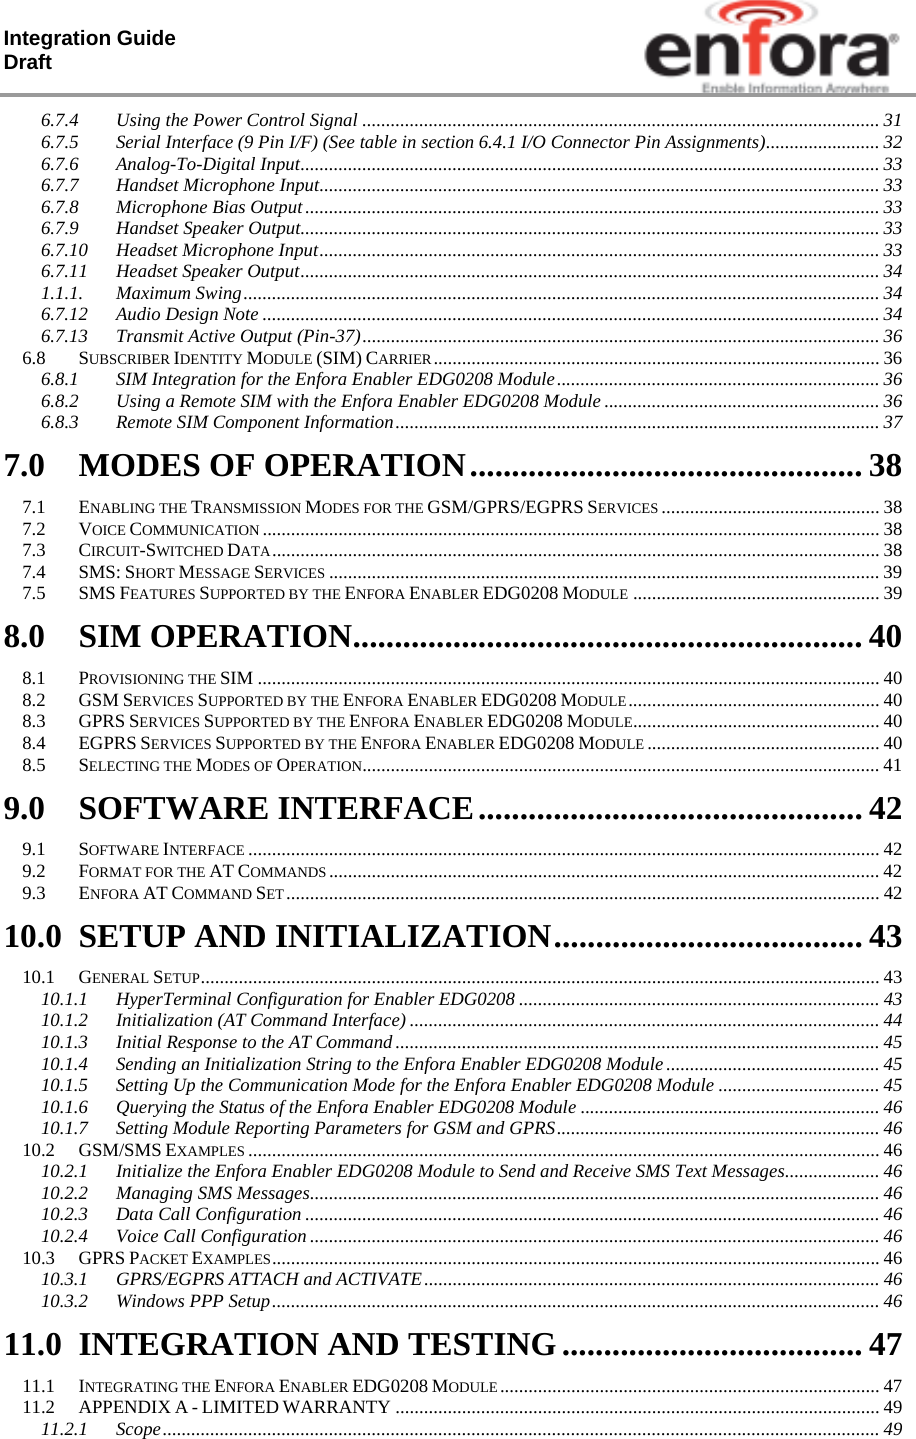 Integration Guide  Draft 6.7.4Using the Power Control Signal ............................................................................................................. 316.7.5Serial Interface (9 Pin I/F) (See table in section 6.4.1 I/O Connector Pin Assignments) ........................  326.7.6Analog-To-Digital Input .......................................................................................................................... 336.7.7Handset Microphone Input ...................................................................................................................... 336.7.8Microphone Bias Output ......................................................................................................................... 336.7.9Handset Speaker Output .......................................................................................................................... 336.7.10Headset Microphone Input ...................................................................................................................... 336.7.11Headset Speaker Output .......................................................................................................................... 341.1.1.Maximum Swing ...................................................................................................................................... 346.7.12Audio Design Note .................................................................................................................................. 346.7.13Transmit Active Output (Pin-37) ............................................................................................................. 366.8SUBSCRIBER IDENTITY MODULE (SIM) CARRIER .............................................................................................. 366.8.1SIM Integration for the Enfora Enabler EDG0208 Module .................................................................... 366.8.2Using a Remote SIM with the Enfora Enabler EDG0208 Module .......................................................... 366.8.3Remote SIM Component Information ...................................................................................................... 377.0MODES OF OPERATION ............................................... 387.1ENABLING THE TRANSMISSION MODES FOR THE GSM/GPRS/EGPRS SERVICES .............................................. 387.2VOICE COMMUNICATION .................................................................................................................................. 387.3CIRCUIT-SWITCHED DATA ................................................................................................................................ 387.4SMS: SHORT MESSAGE SERVICES .................................................................................................................... 397.5SMS FEATURES SUPPORTED BY THE ENFORA ENABLER EDG0208 MODULE .................................................... 398.0SIM OPERATION ............................................................. 408.1PROVISIONING THE SIM ................................................................................................................................... 408.2GSM SERVICES SUPPORTED BY THE ENFORA ENABLER EDG0208 MODULE ..................................................... 408.3GPRS SERVICES SUPPORTED BY THE ENFORA ENABLER EDG0208 MODULE.................................................... 408.4EGPRS SERVICES SUPPORTED BY THE ENFORA ENABLER EDG0208 MODULE ................................................. 408.5SELECTING THE MODES OF OPERATION............................................................................................................. 419.0SOFTWARE INTERFACE .............................................. 429.1SOFTWARE INTERFACE ..................................................................................................................................... 429.2FORMAT FOR THE AT COMMANDS .................................................................................................................... 429.3ENFORA AT COMMAND SET .............................................................................................................................  4210.0SETUP AND INITIALIZATION ..................................... 4310.1GENERAL SETUP ............................................................................................................................................... 4310.1.1HyperTerminal Configuration for Enabler EDG0208 ............................................................................ 4310.1.2Initialization (AT Command Interface) ................................................................................................... 4410.1.3Initial Response to the AT Command ...................................................................................................... 4510.1.4Sending an Initialization String to the Enfora Enabler EDG0208 Module ............................................. 4510.1.5Setting Up the Communication Mode for the Enfora Enabler EDG0208 Module .................................. 4510.1.6Querying the Status of the Enfora Enabler EDG0208 Module ............................................................... 4610.1.7Setting Module Reporting Parameters for GSM and GPRS .................................................................... 4610.2GSM/SMS EXAMPLES ..................................................................................................................................... 4610.2.1Initialize the Enfora Enabler EDG0208 Module to Send and Receive SMS Text Messages ....................  4610.2.2Managing SMS Messages ........................................................................................................................ 4610.2.3Data Call Configuration ......................................................................................................................... 4610.2.4Voice Call Configuration ........................................................................................................................ 4610.3GPRS PACKET EXAMPLES ................................................................................................................................ 4610.3.1GPRS/EGPRS ATTACH and ACTIVATE ................................................................................................ 4610.3.2Windows PPP Setup ................................................................................................................................ 4611.0INTEGRATION AND TESTING .................................... 4711.1INTEGRATING THE ENFORA ENABLER EDG0208 MODULE ................................................................................  4711.2APPENDIX A - LIMITED WARRANTY ...................................................................................................... 4911.2.1Scope ....................................................................................................................................................... 49